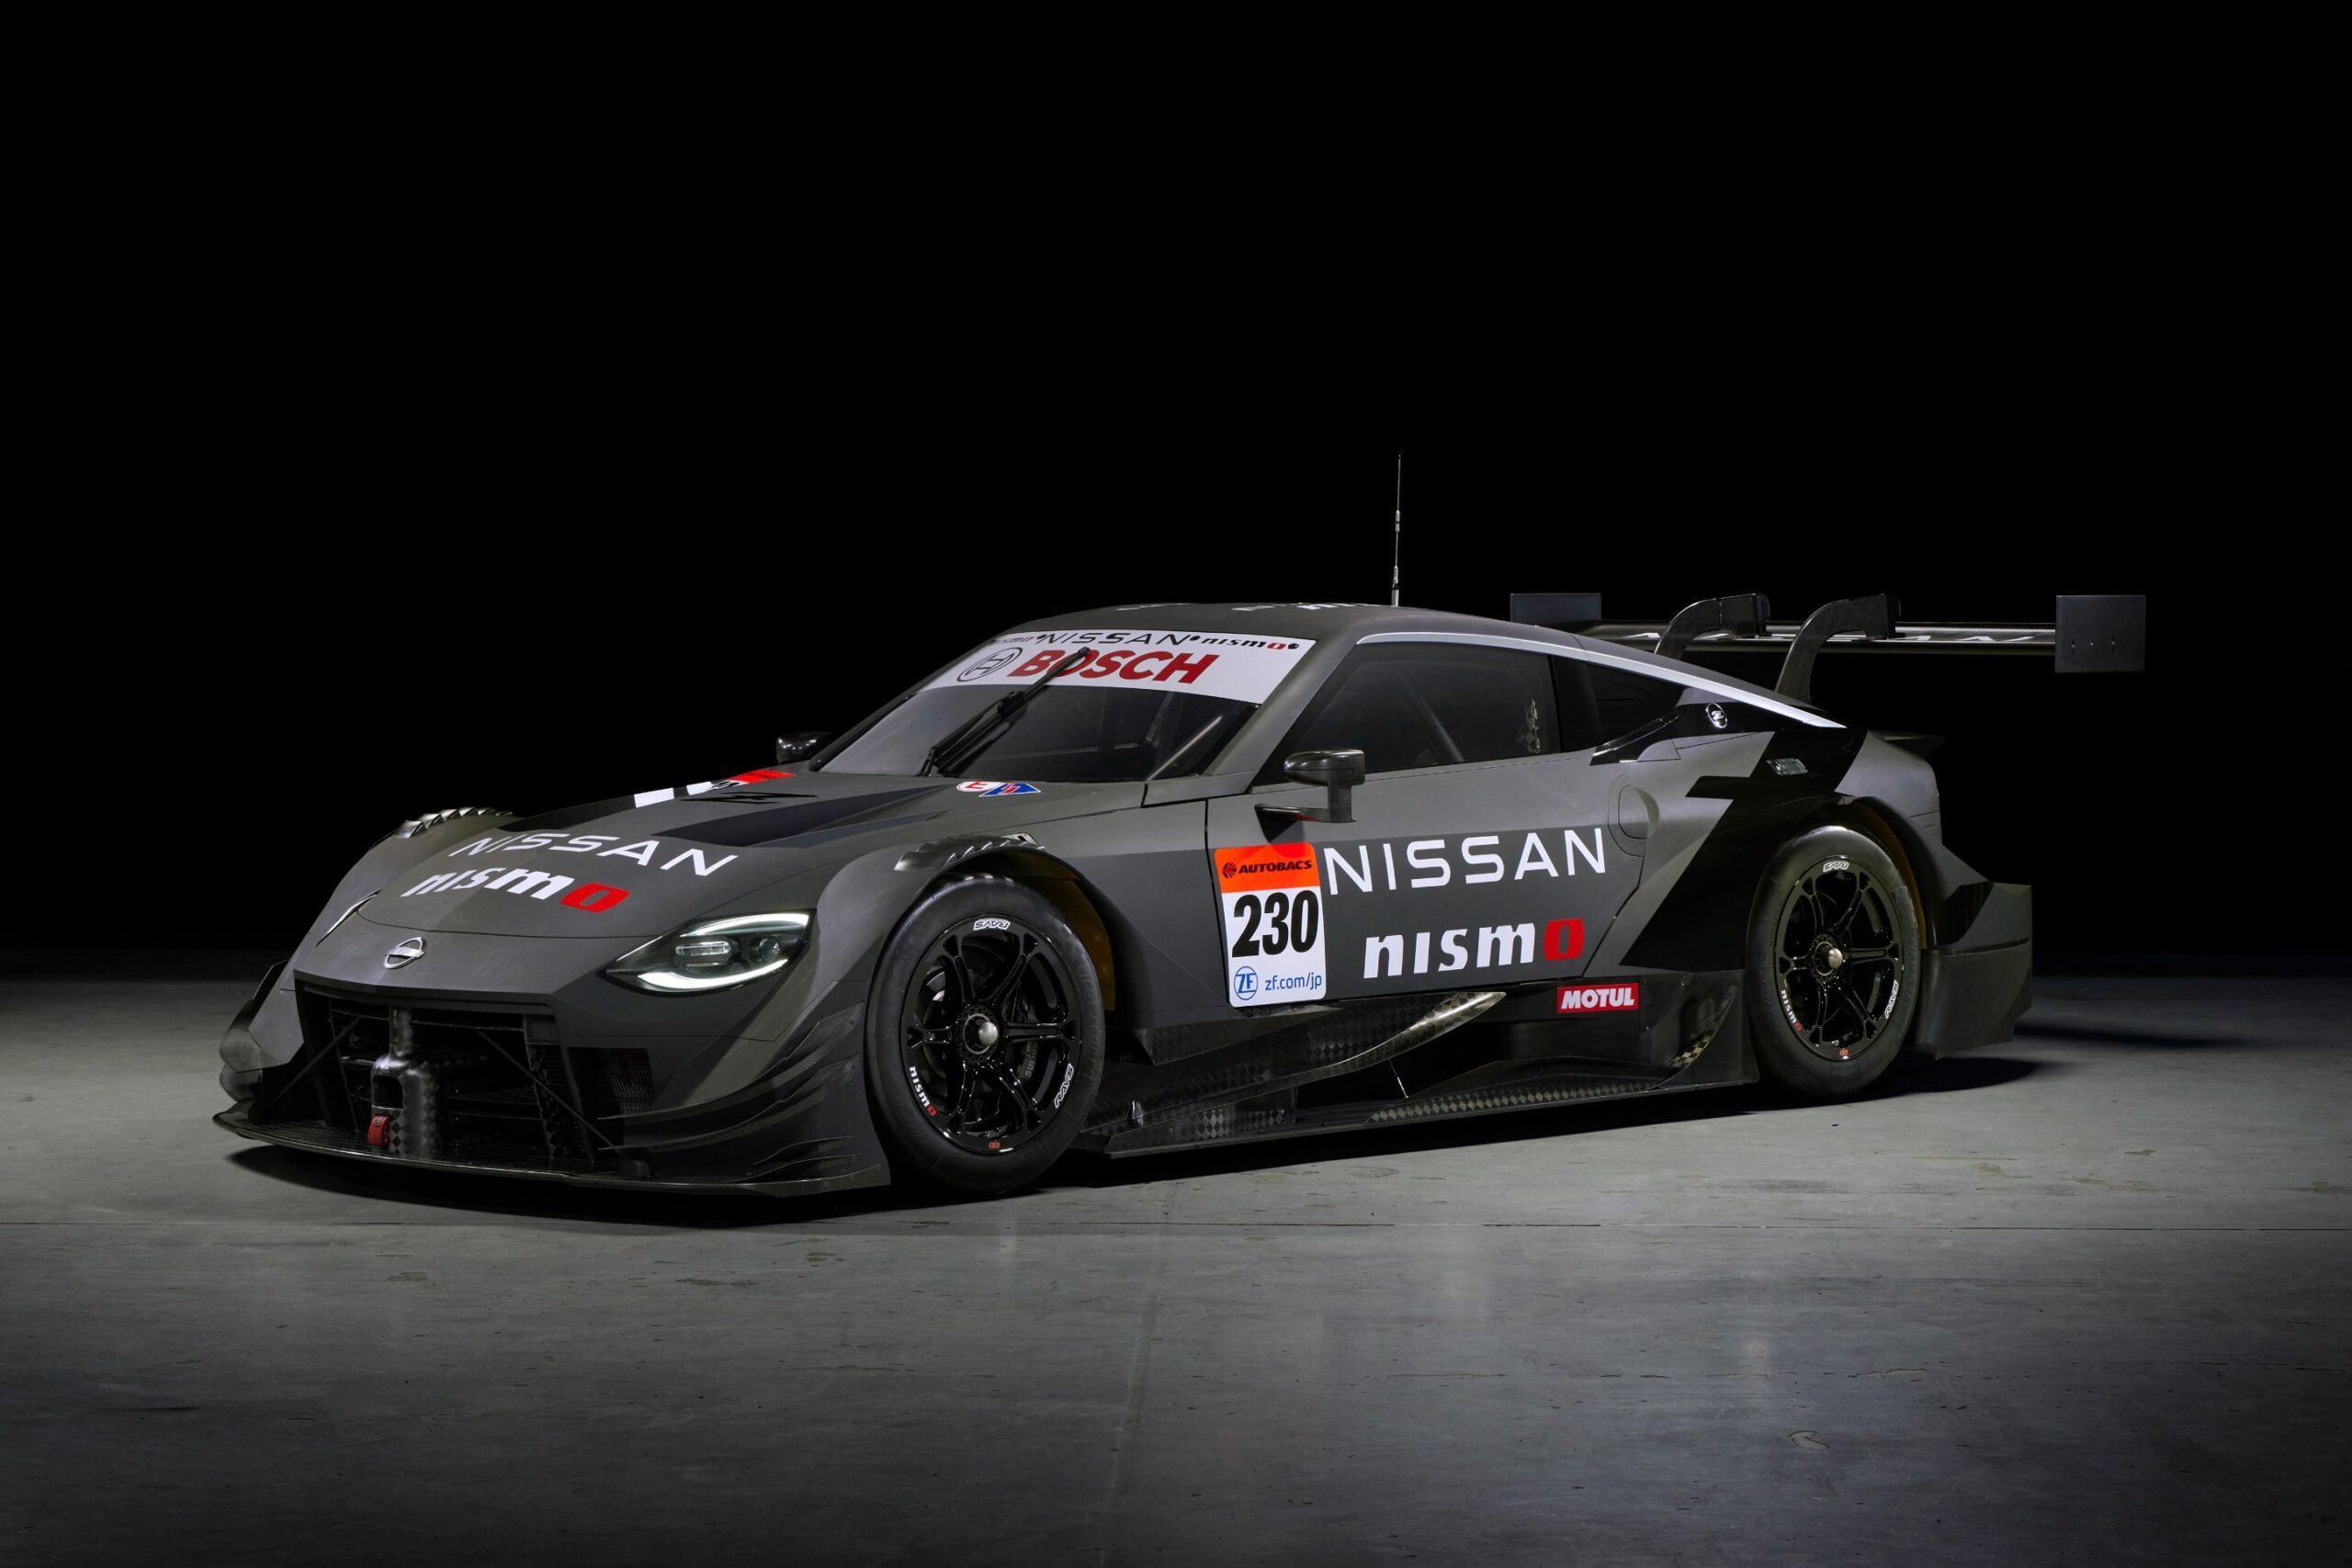 Nissan Z GT500 unveiled at by Nissan